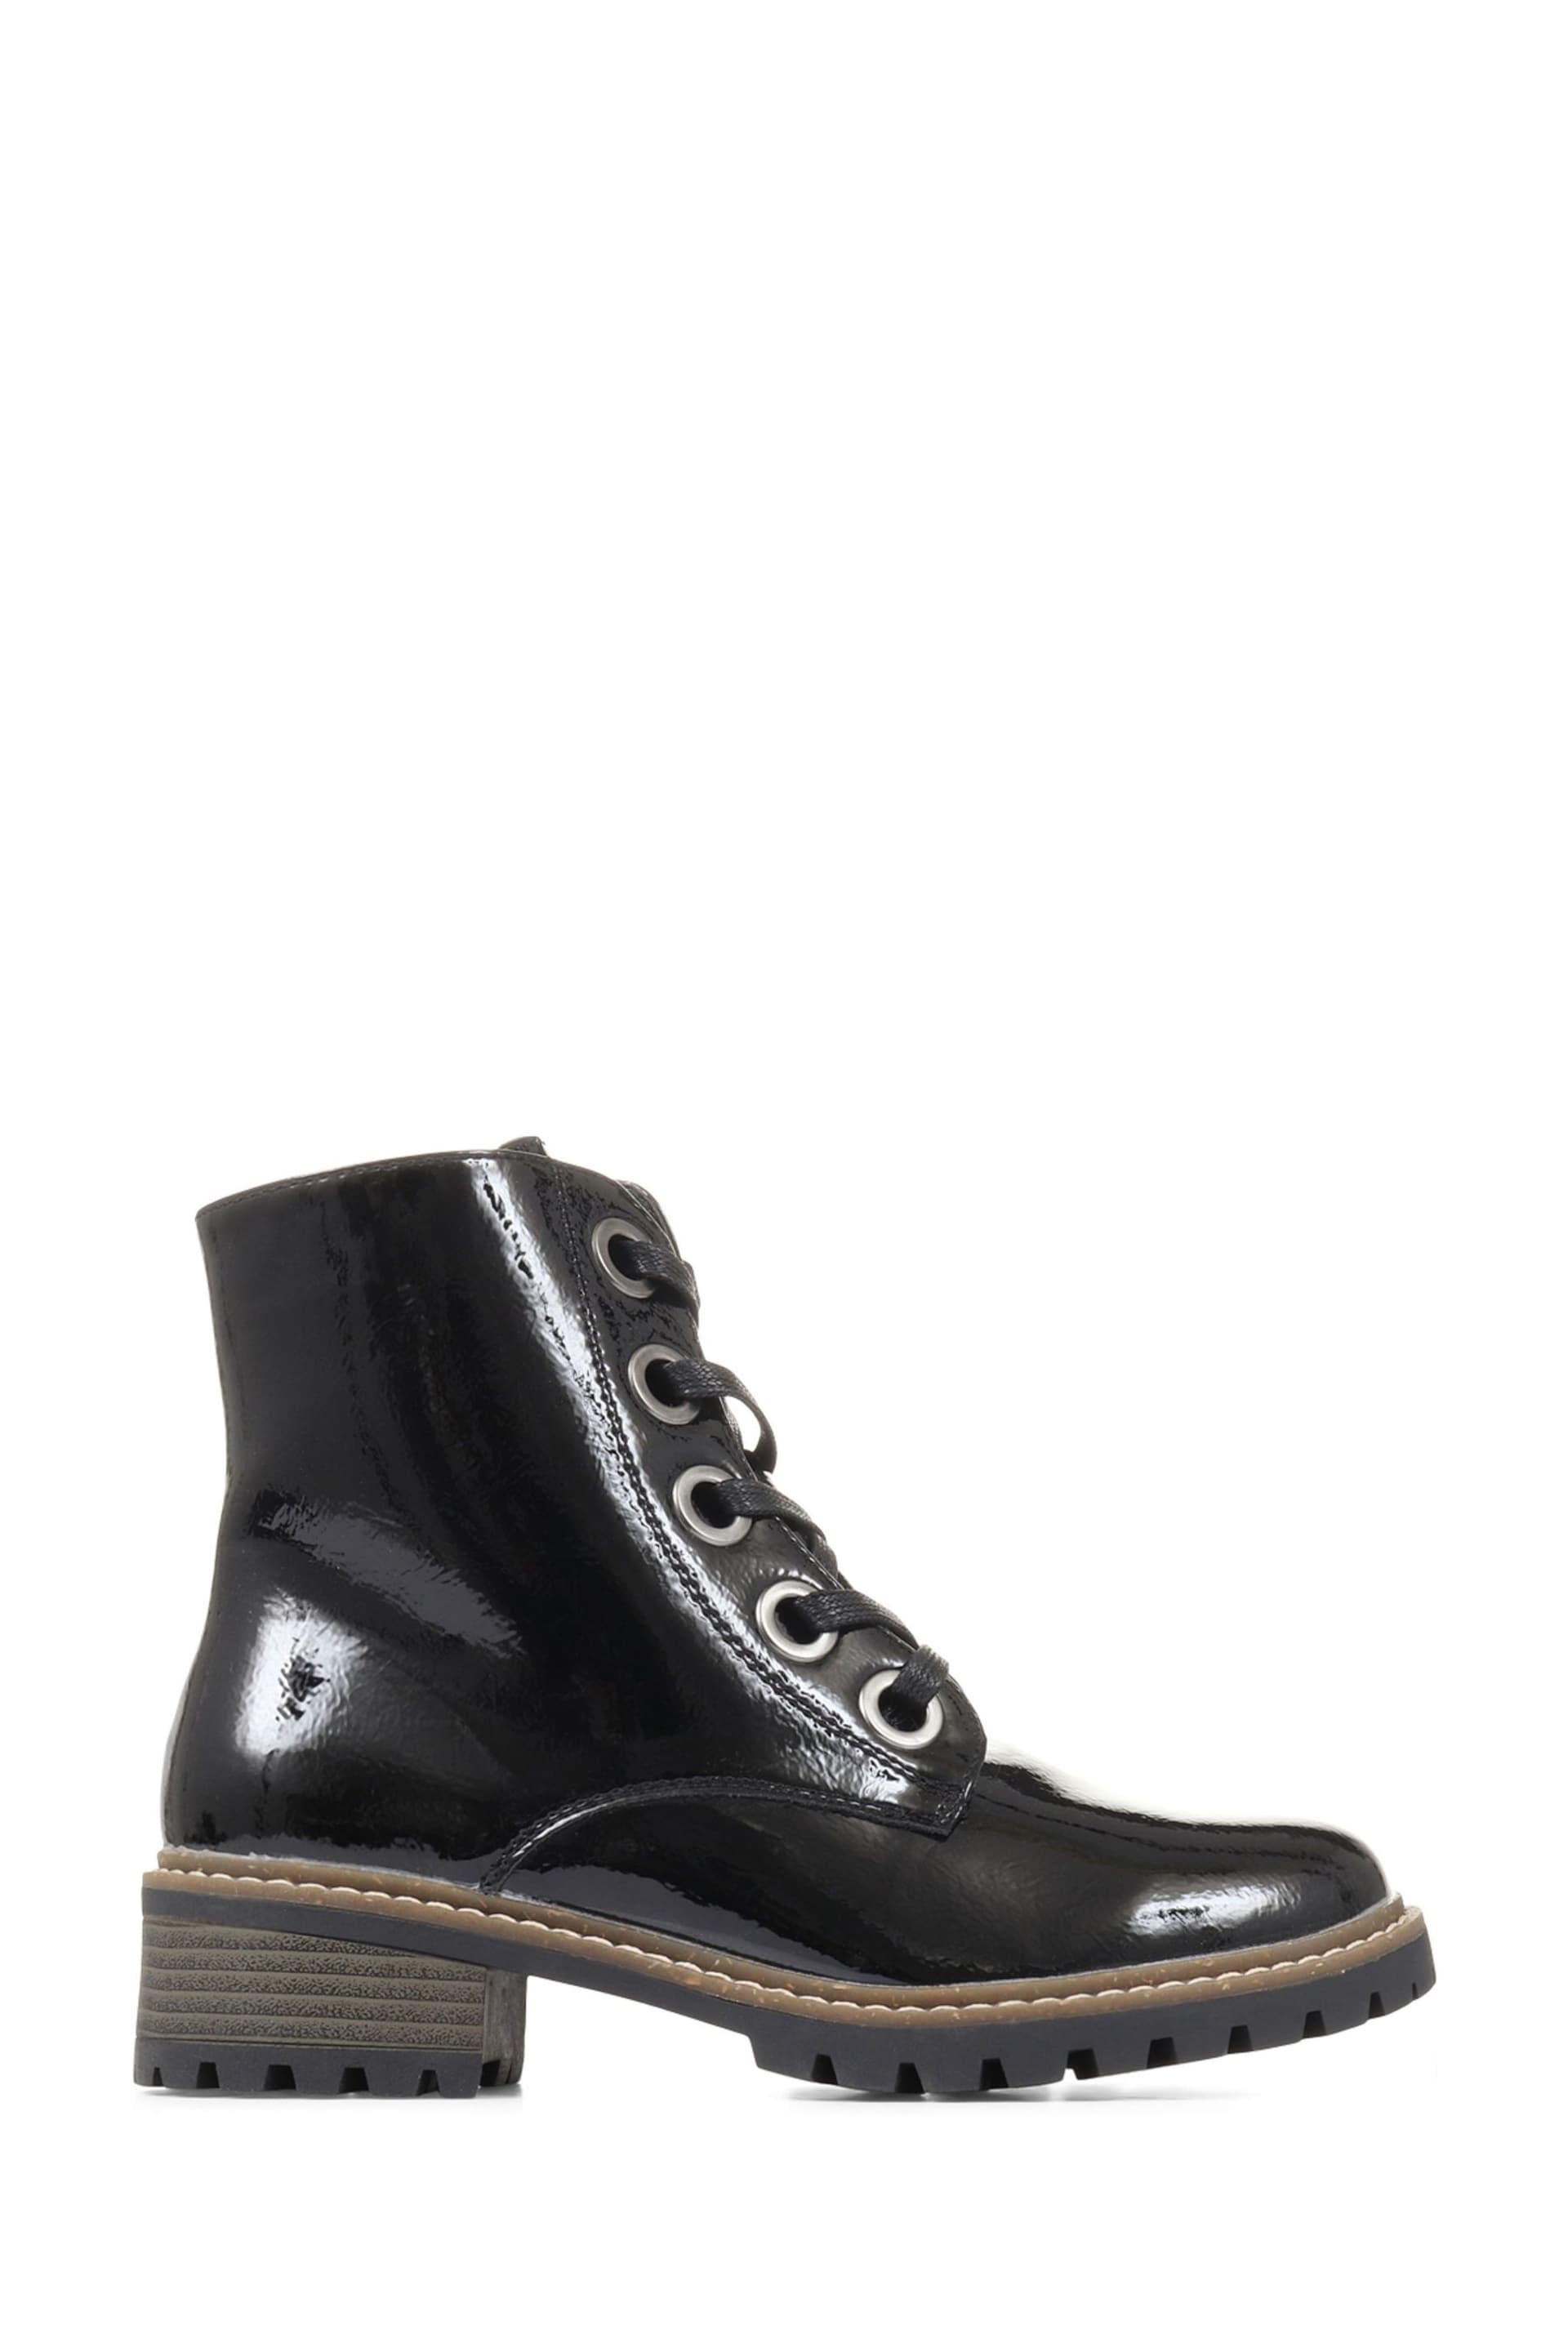 Pavers Metallic Lace Up Ankle Black Boots - Image 1 of 6